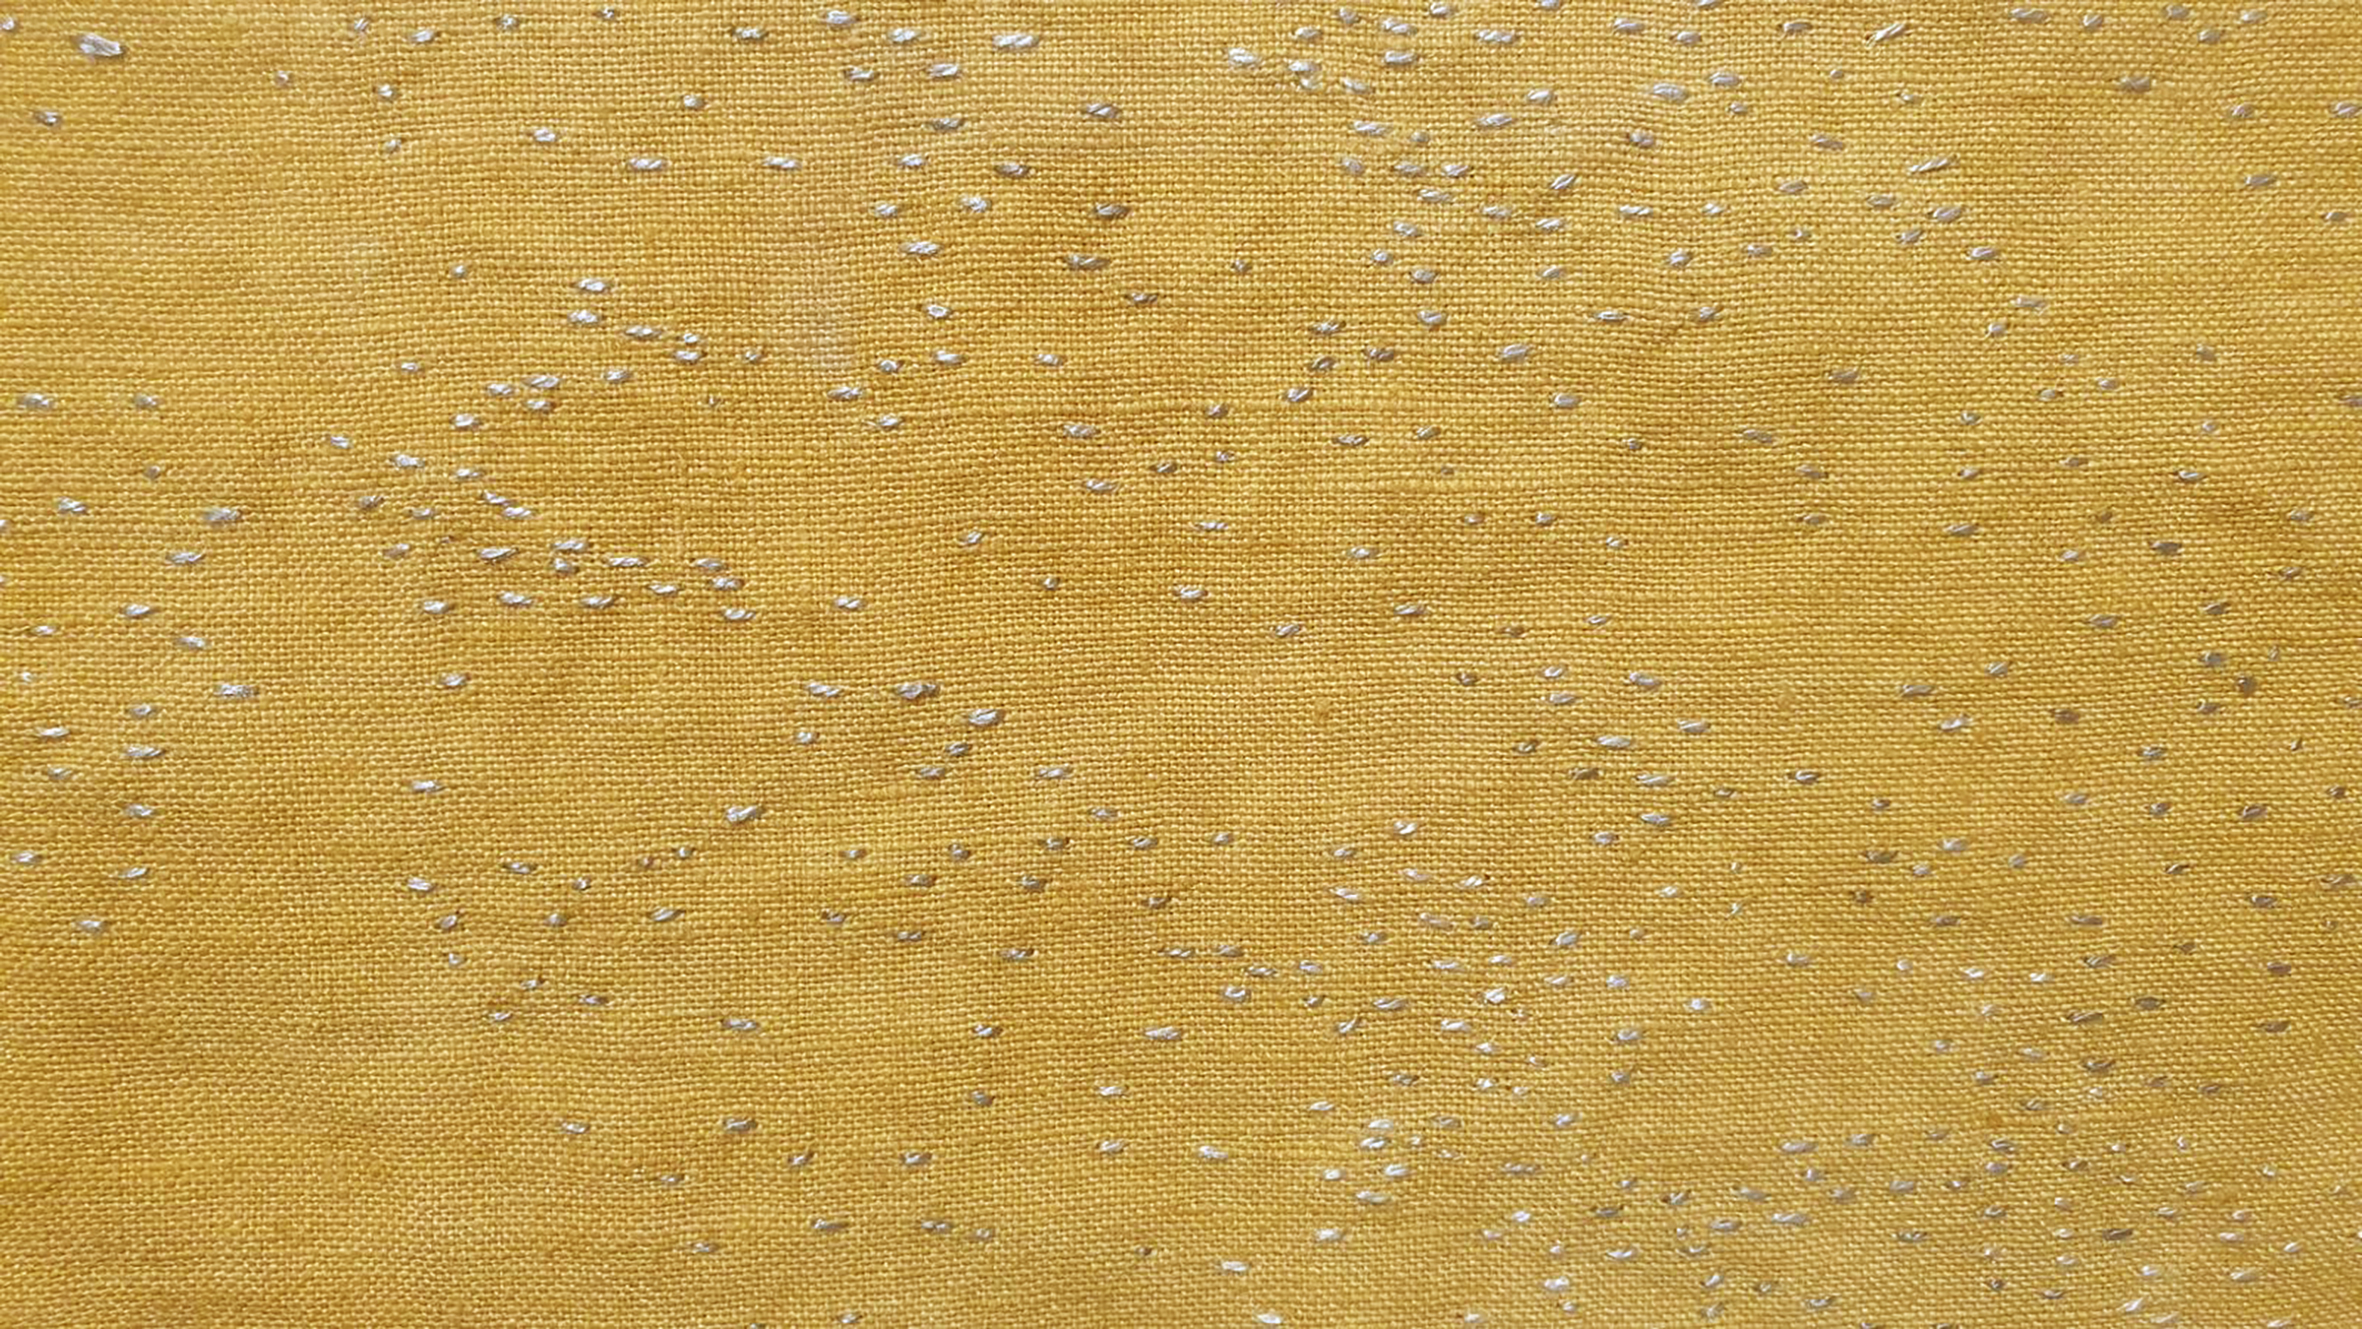 A close-up photograph of artwork in the exhibition that is made out of golden yellow material and thread.